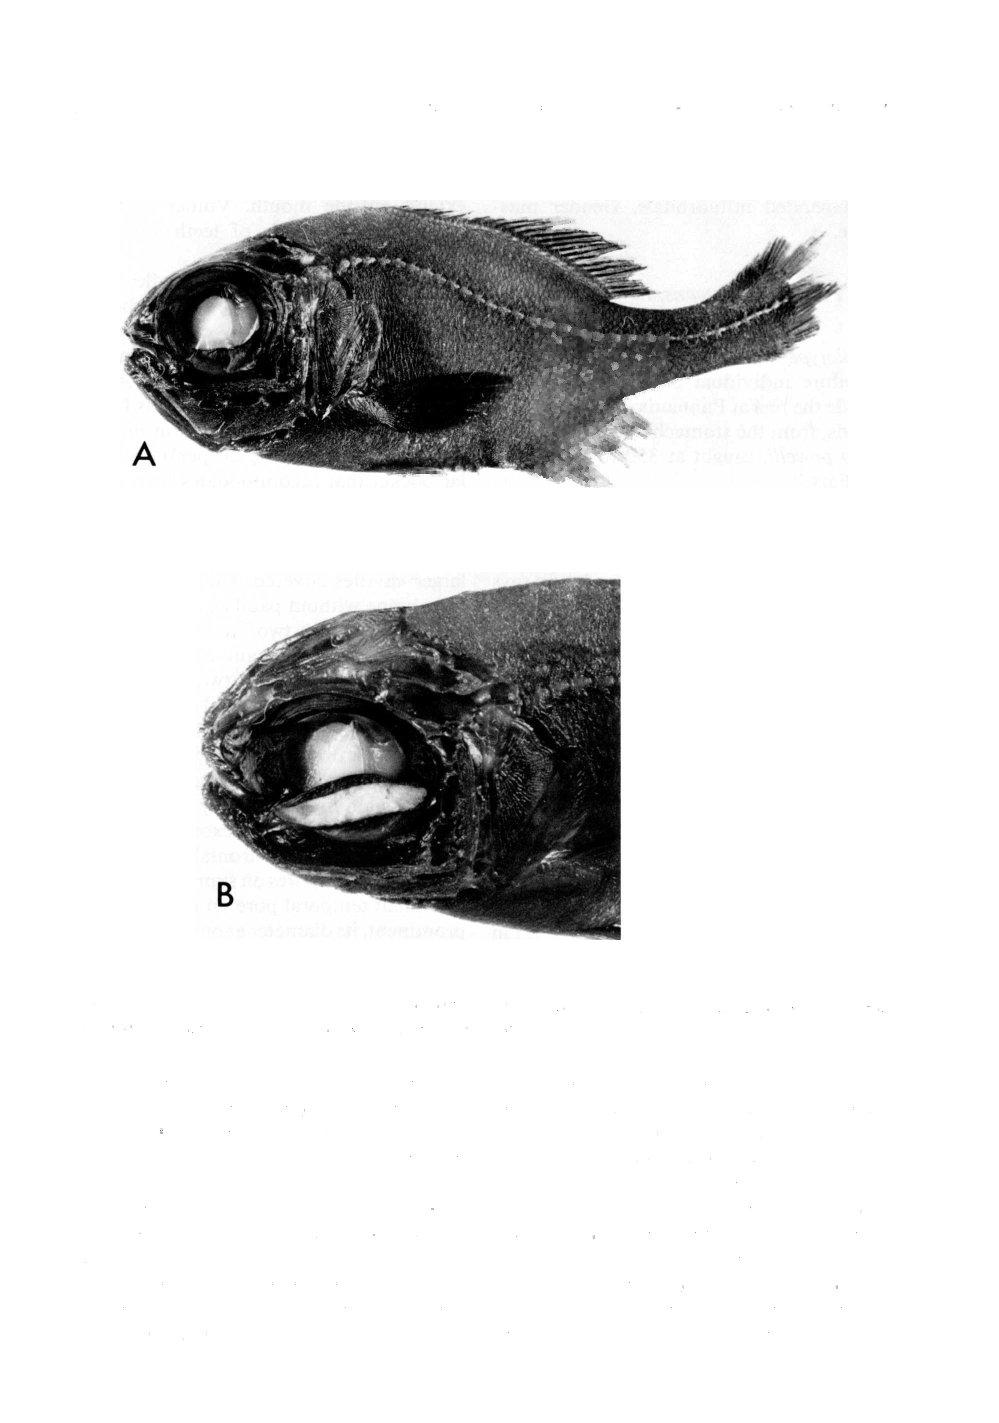 330 PROCEEDINGS OF THE BIOLOGICAL SOCIETY OF WASHINGTON #%5#l... ^ S^C Fig. 1. Holotype of Parmops cornscans, BPBM 30885. A. Whole specimen in lateral view, light organ occluded. B. Head in dorsolateral view, light organ exposed.